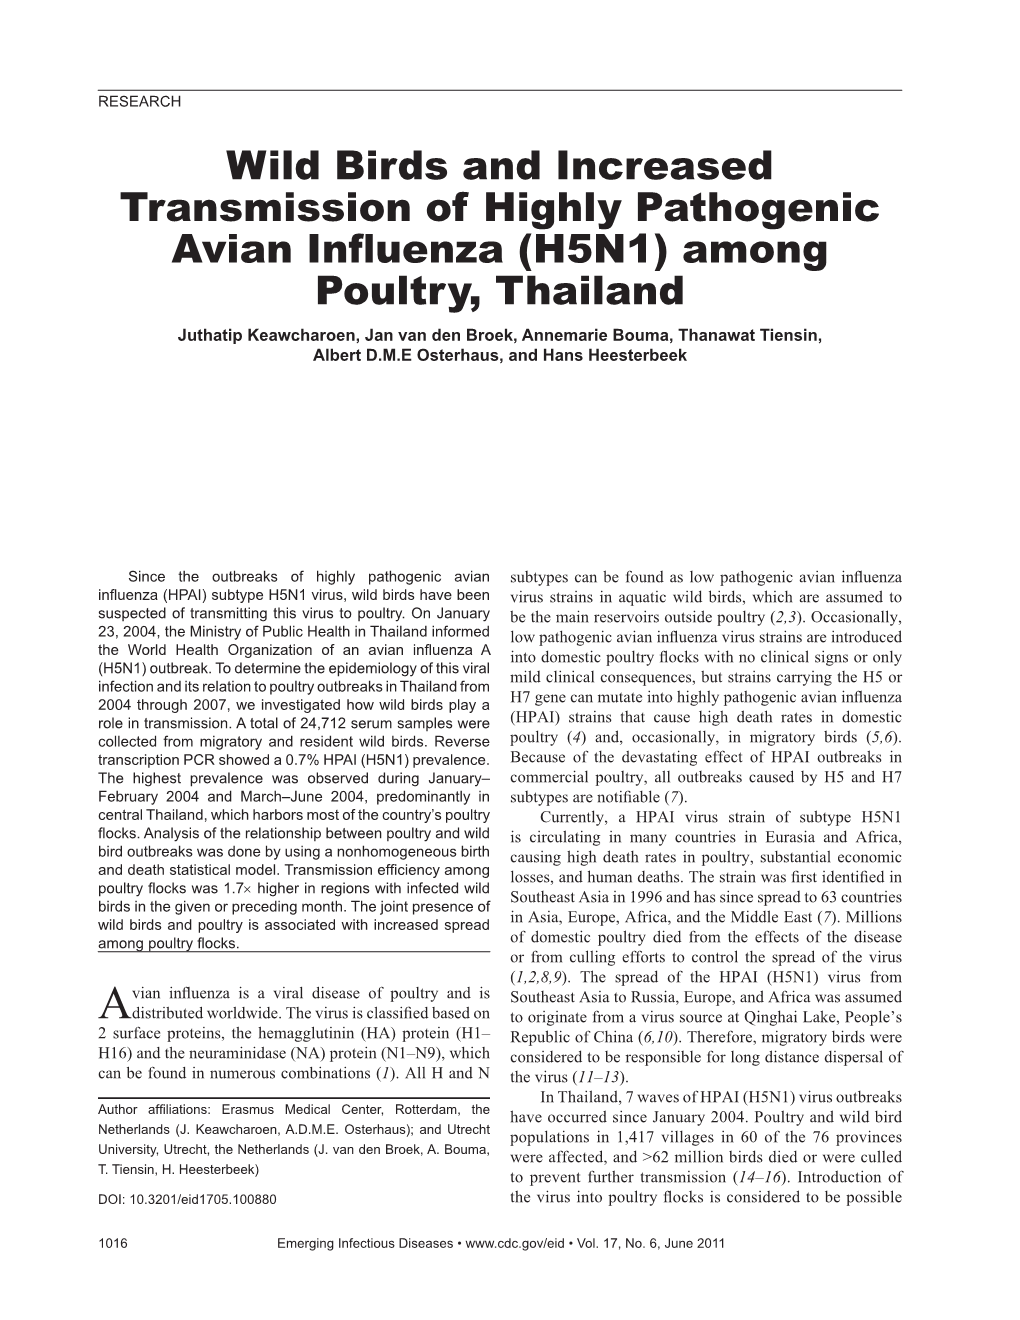 Wild Birds and Increased Transmission of Highly